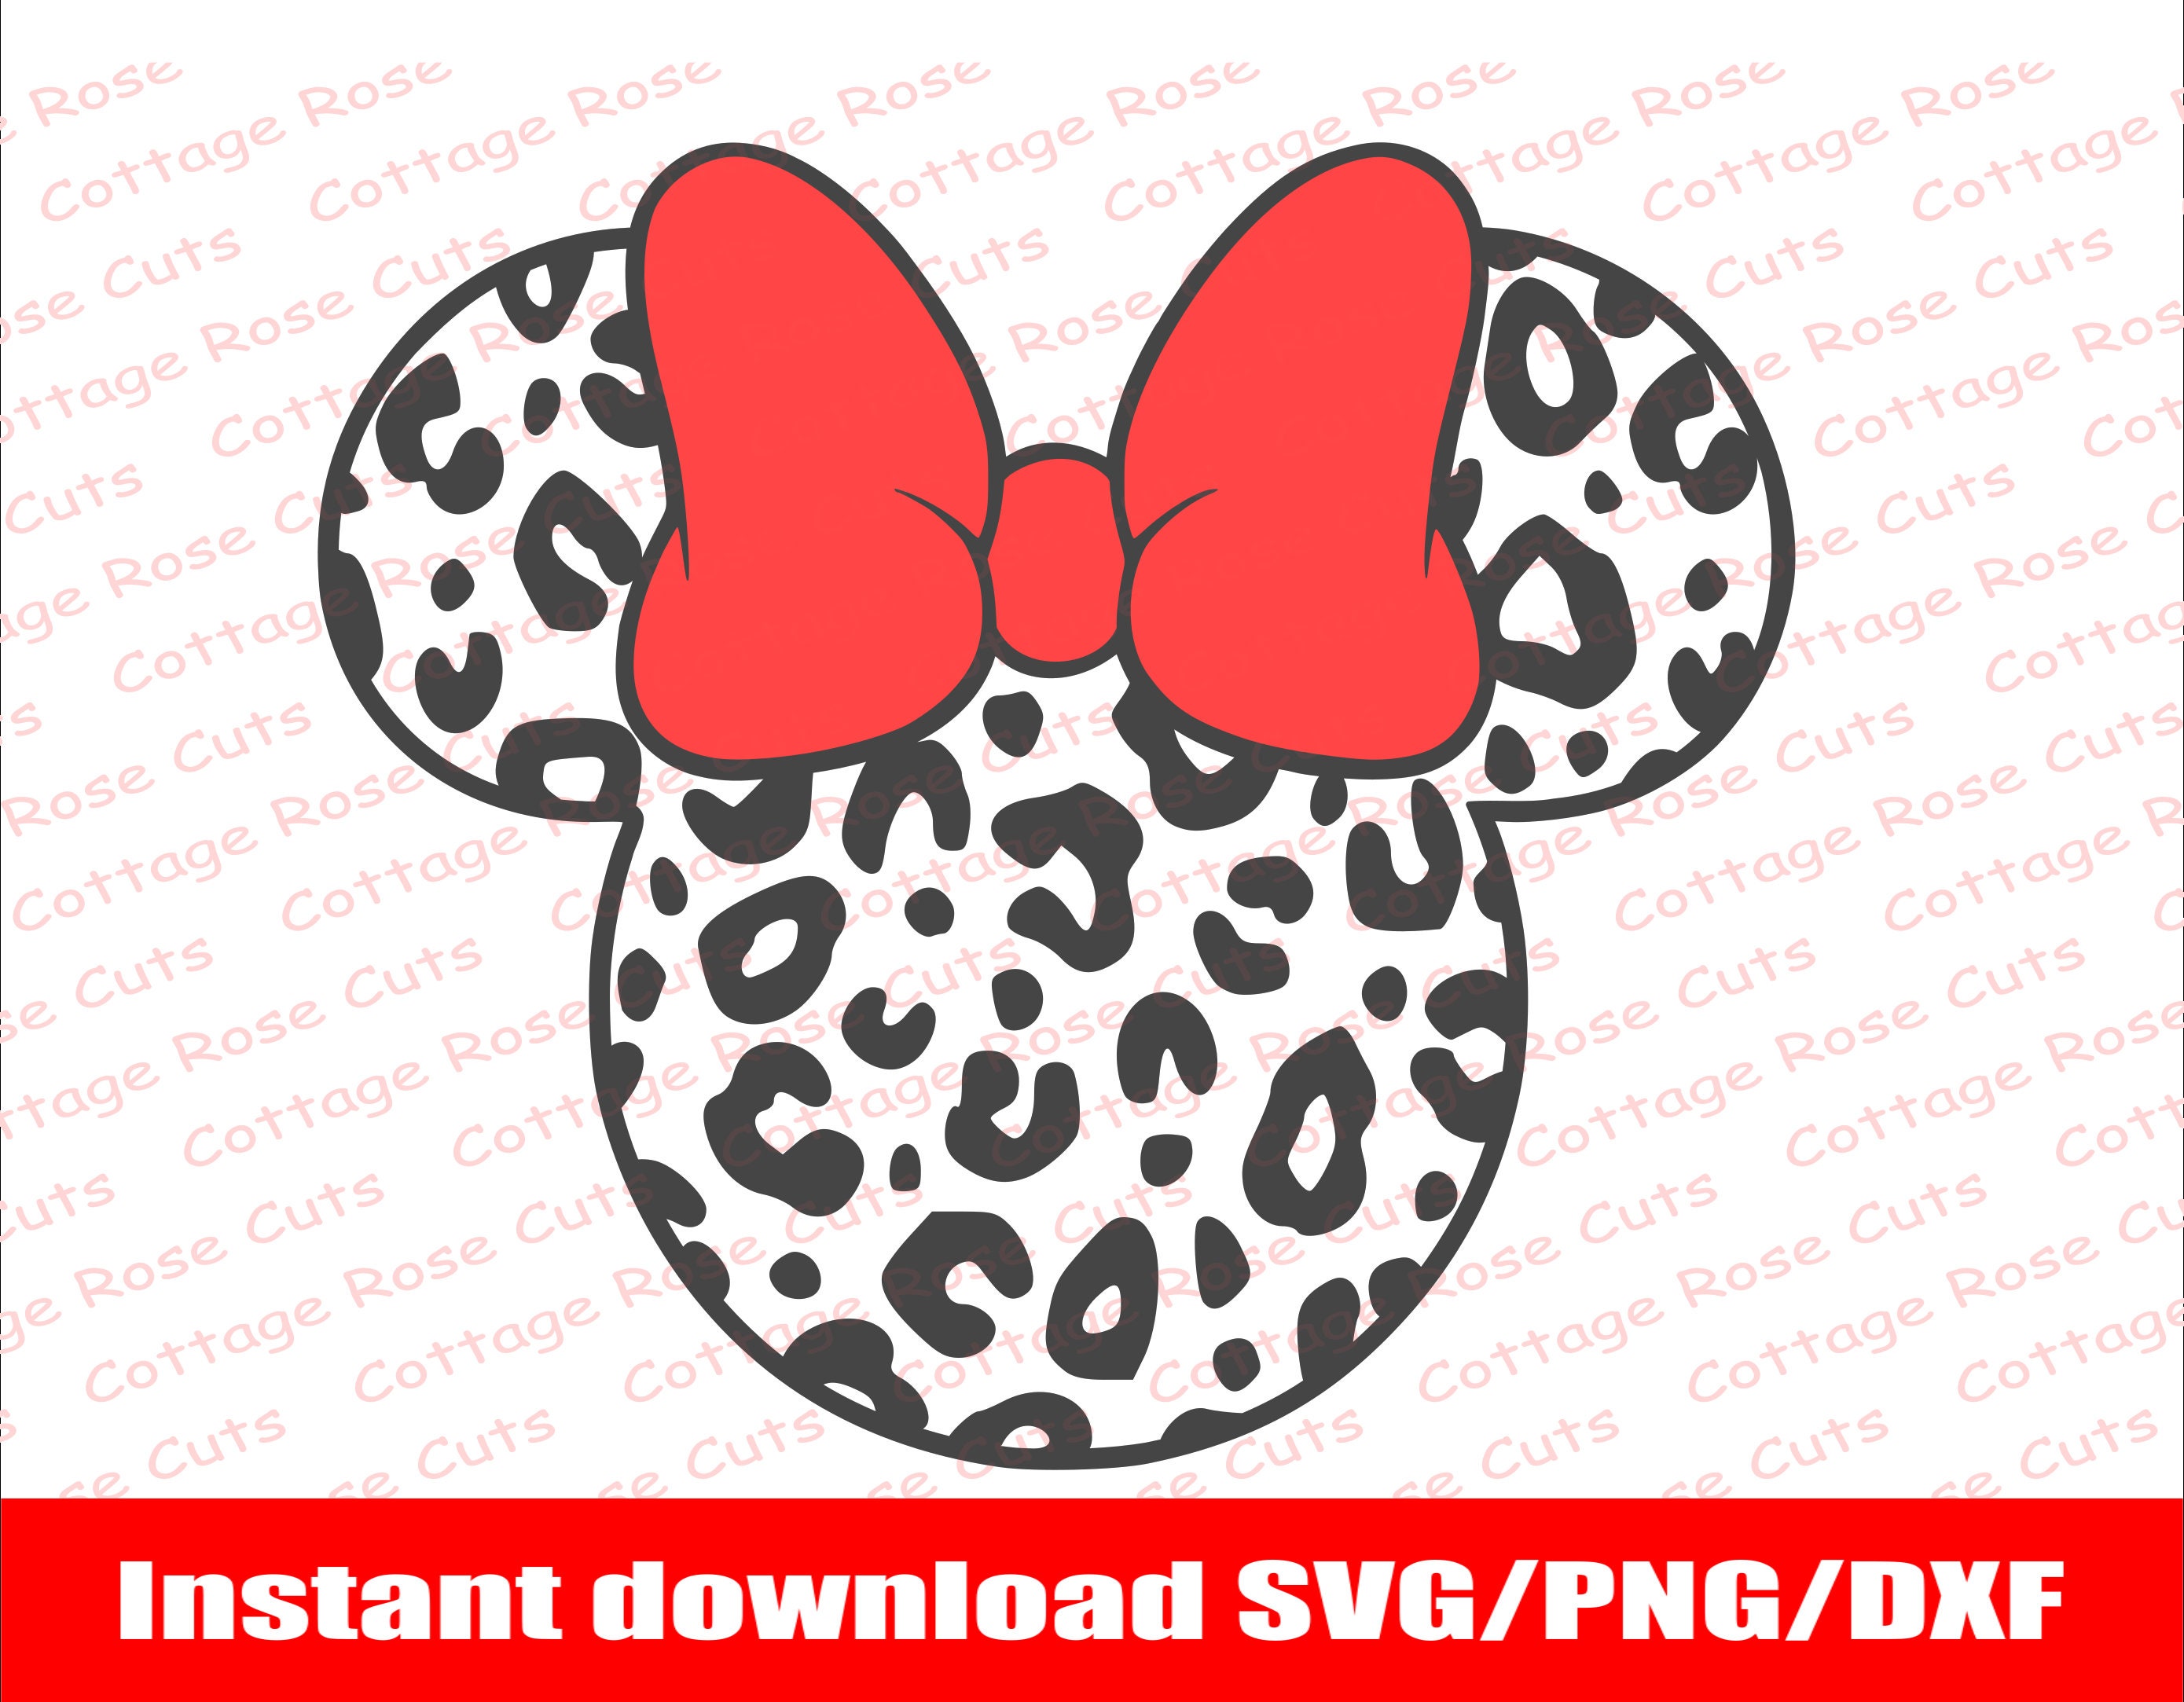 Minnie Mouse Head Chanel SVG, Download Chanel With Minnie Ear And Bow  Vector File, Minnie Ear Chanel Logo png file, Chanel Logo S…